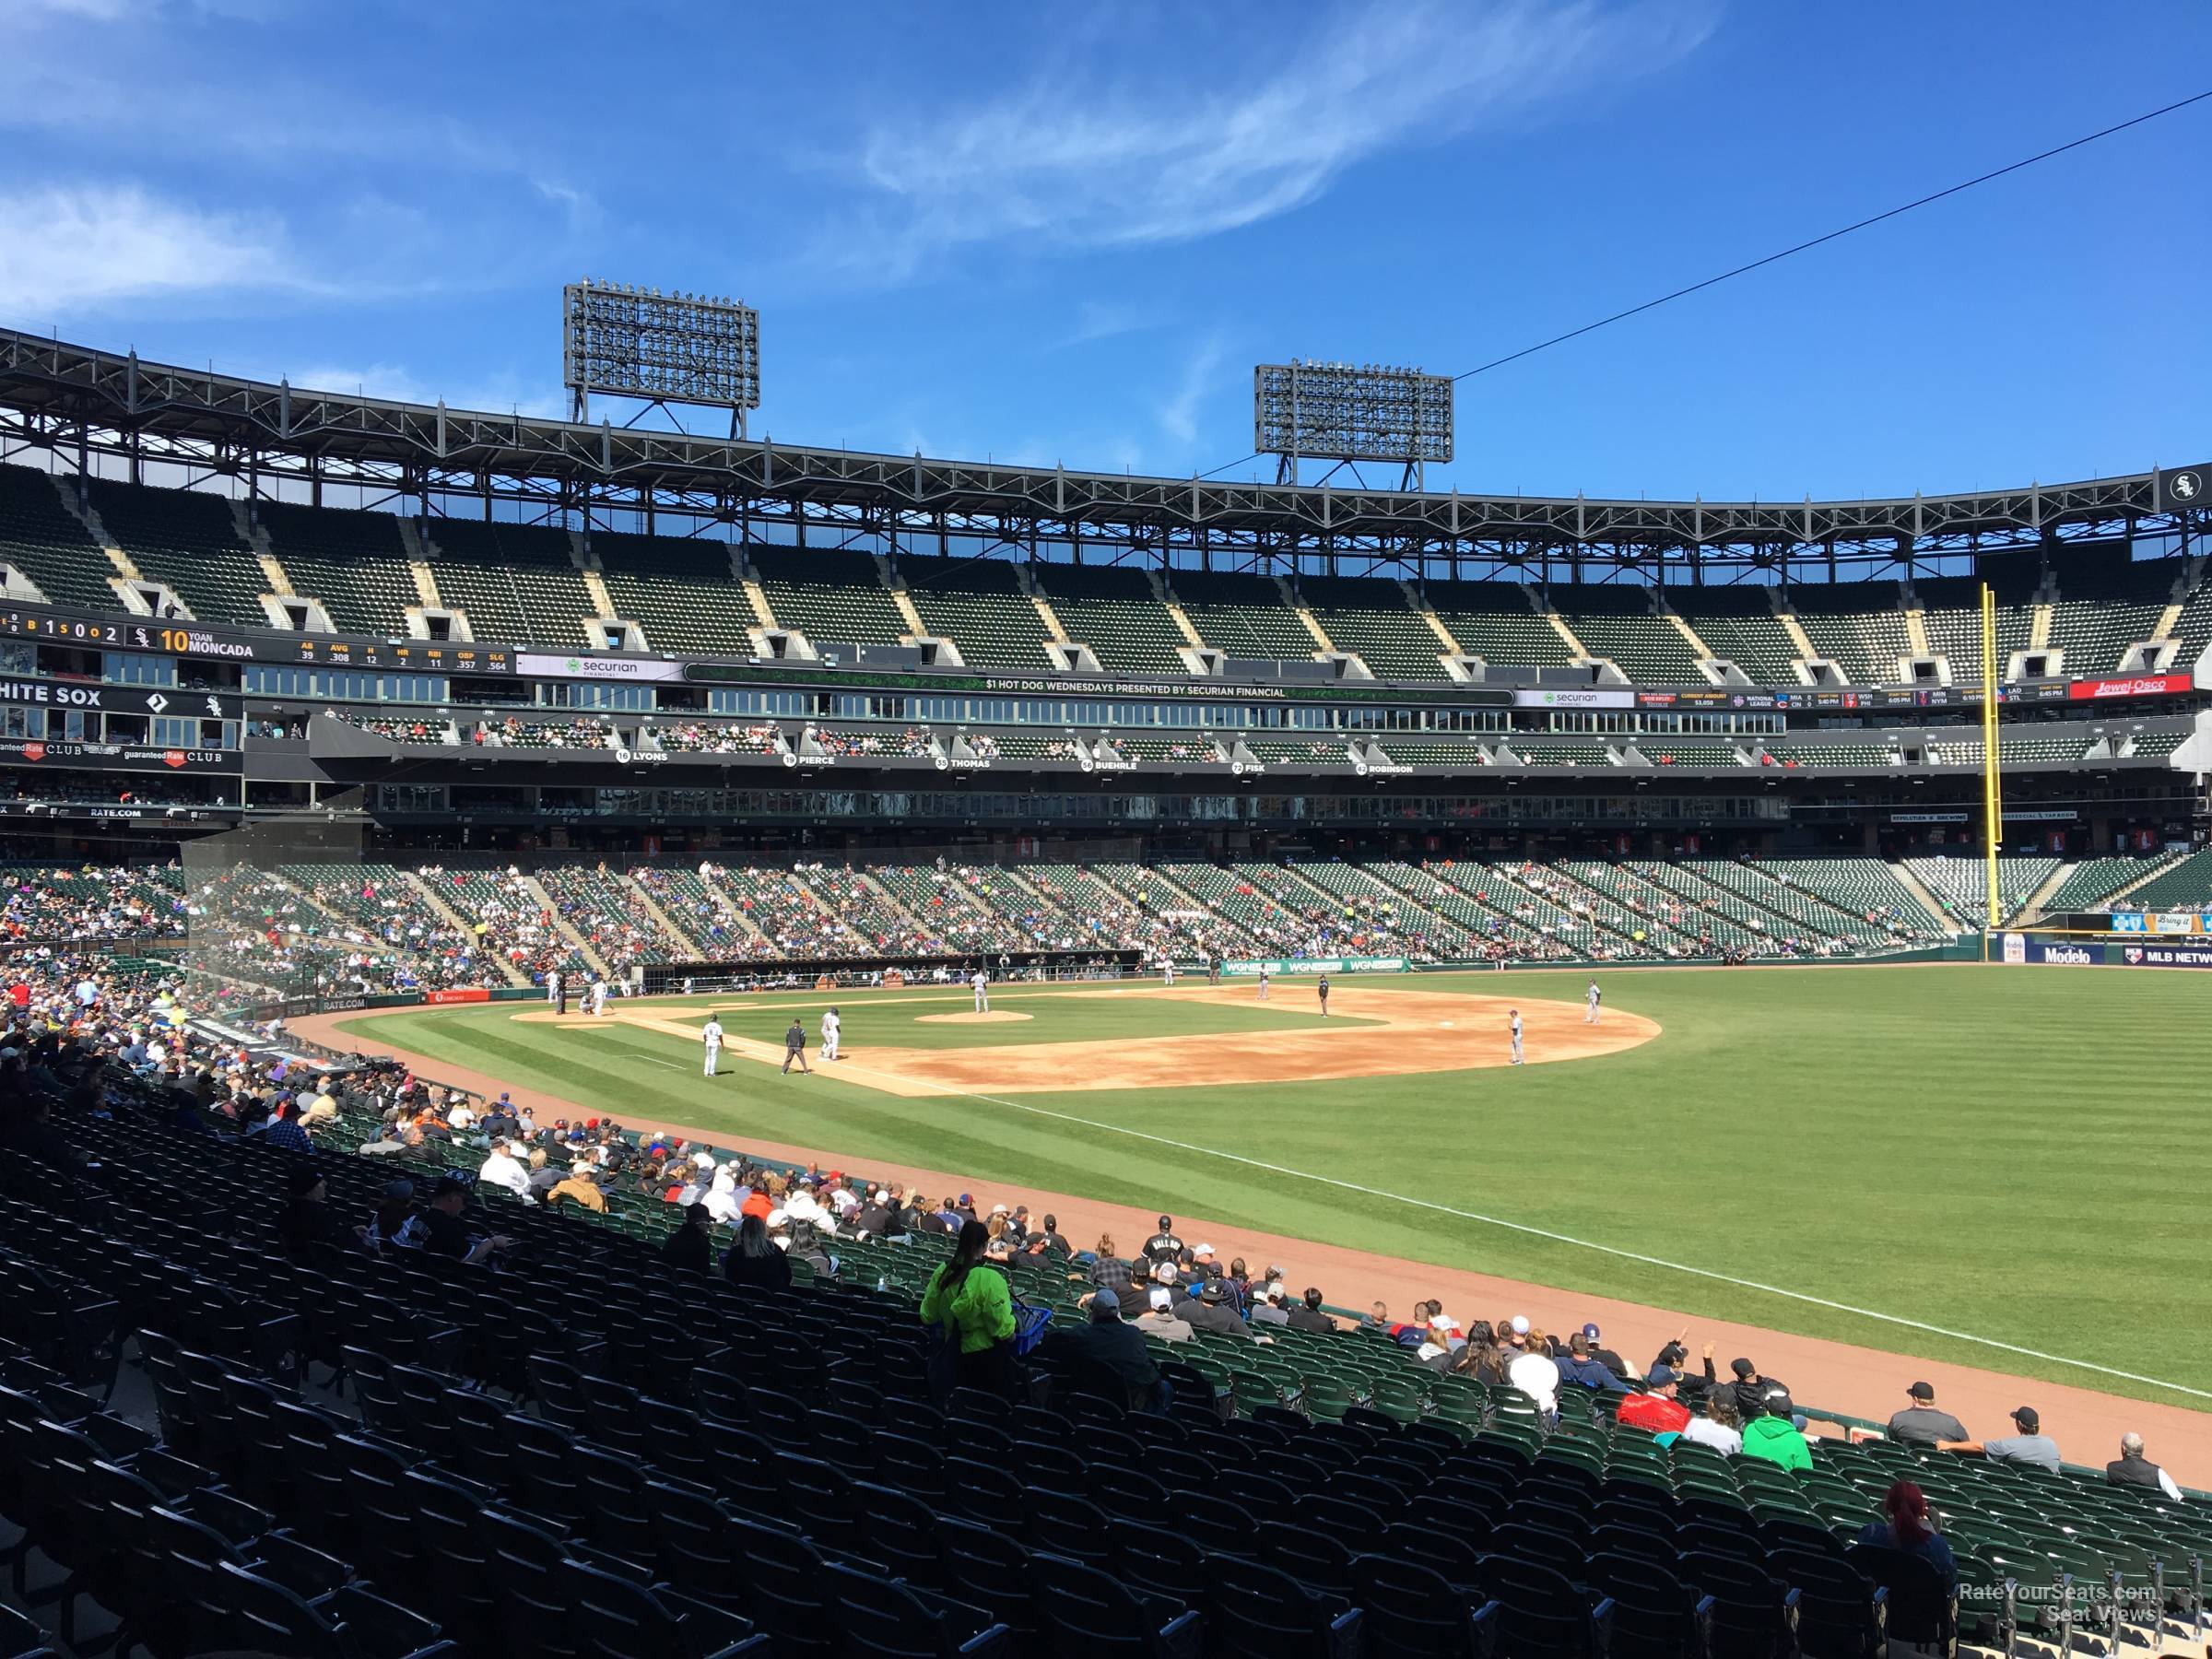 section 113, row 25 seat view  - guaranteed rate field